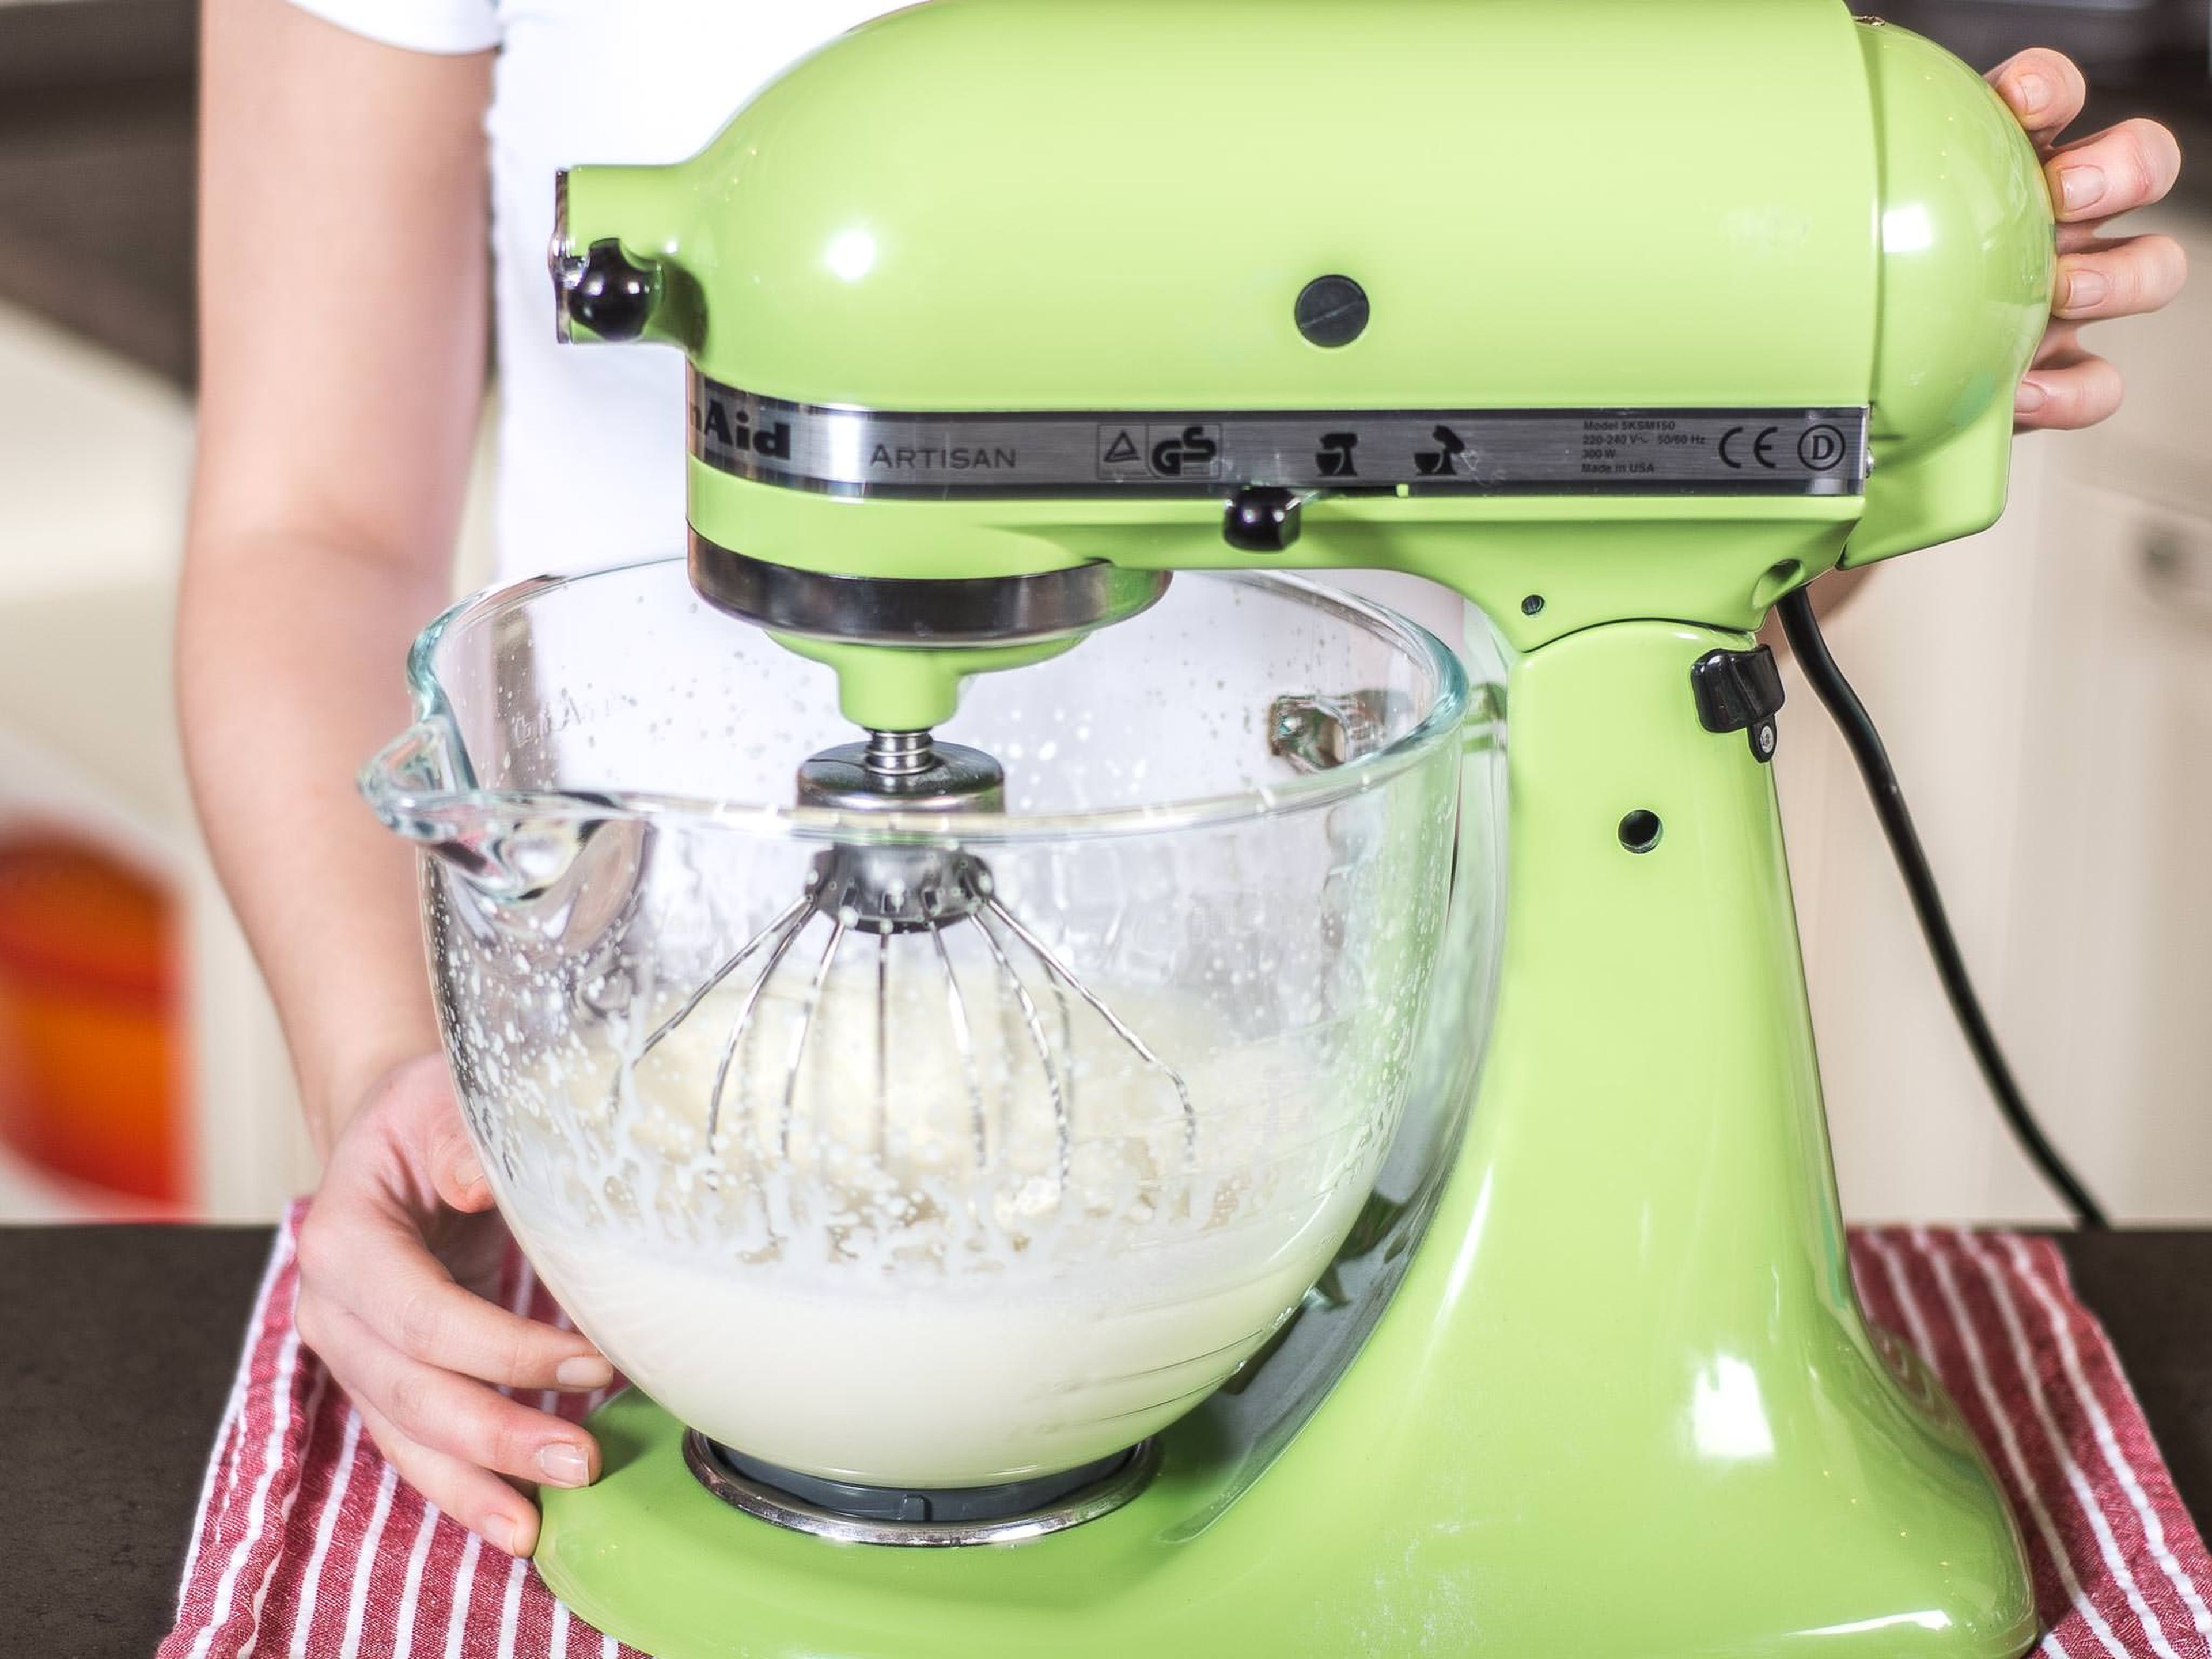 Now whip heavy cream in a standing mixer or with a hand mixer until stiff peaks form.